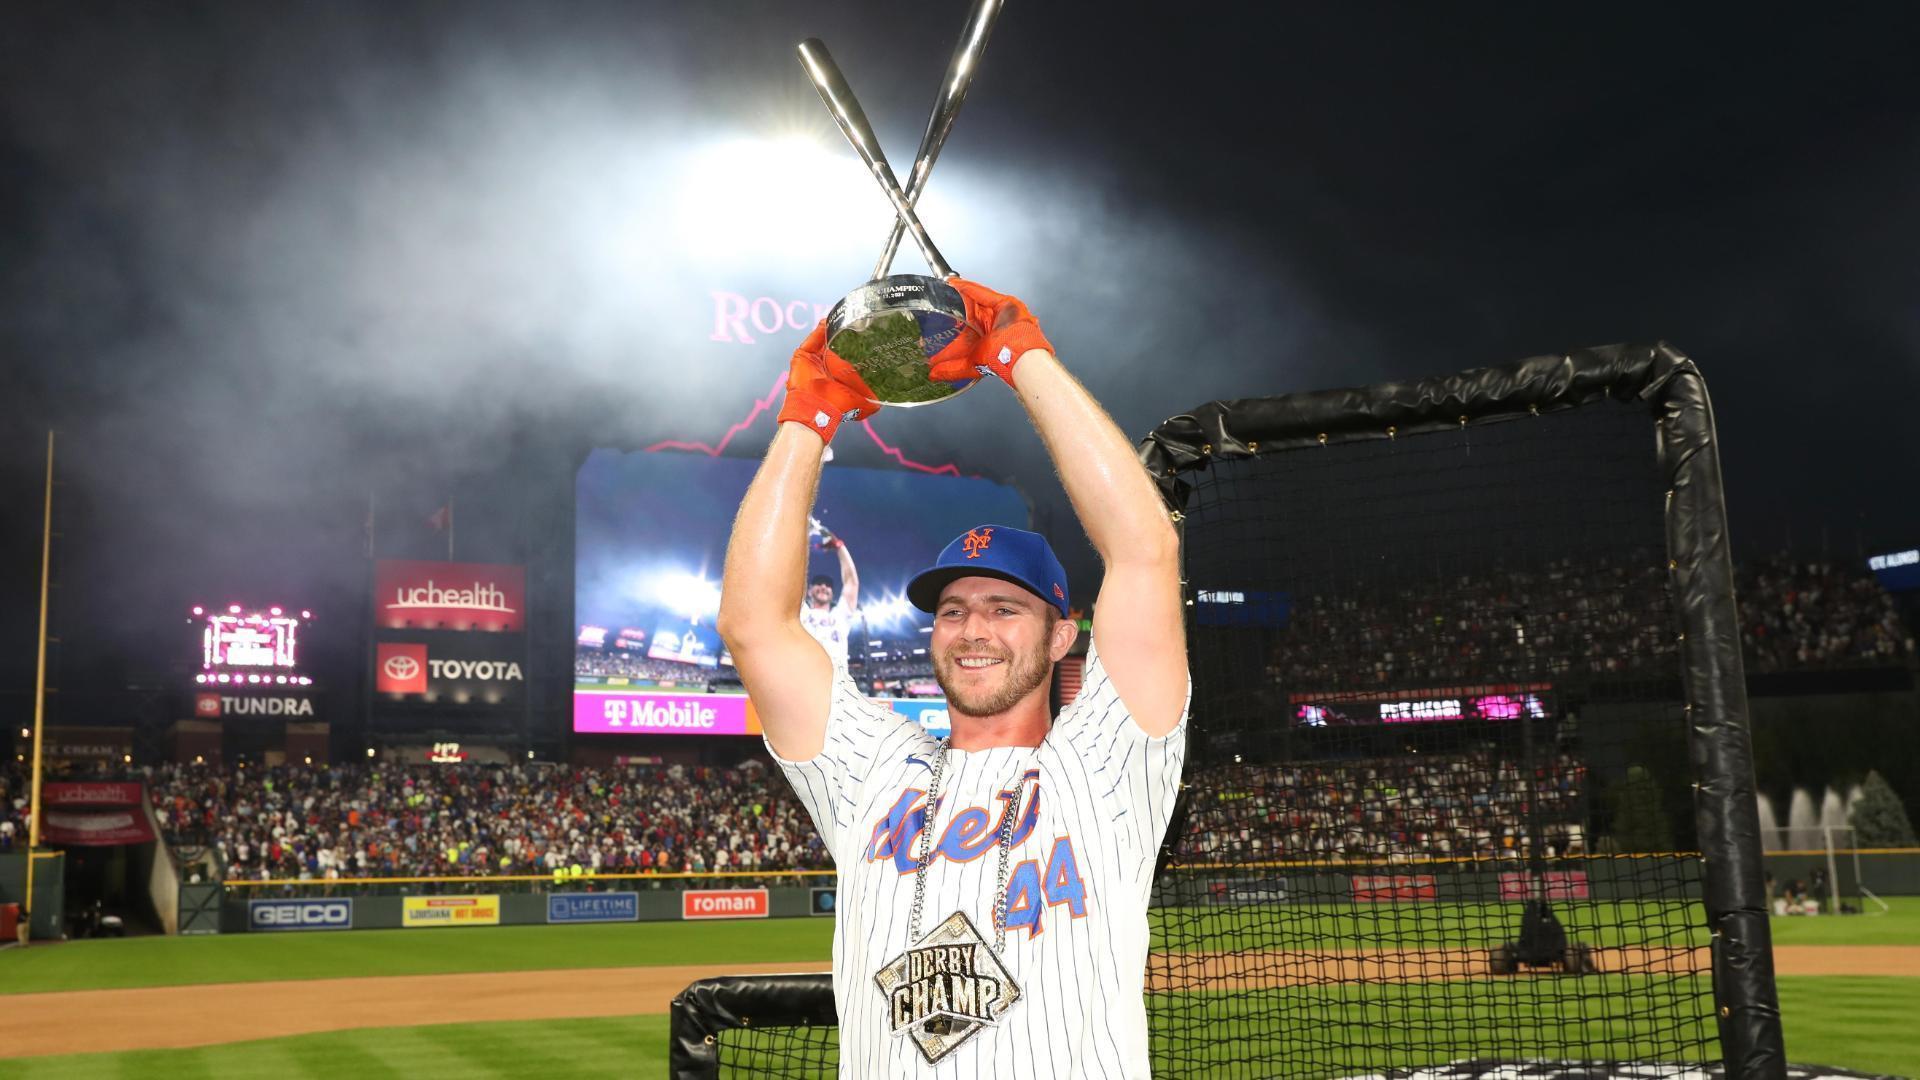 Pete Alonso defends his Home Run Derby crown